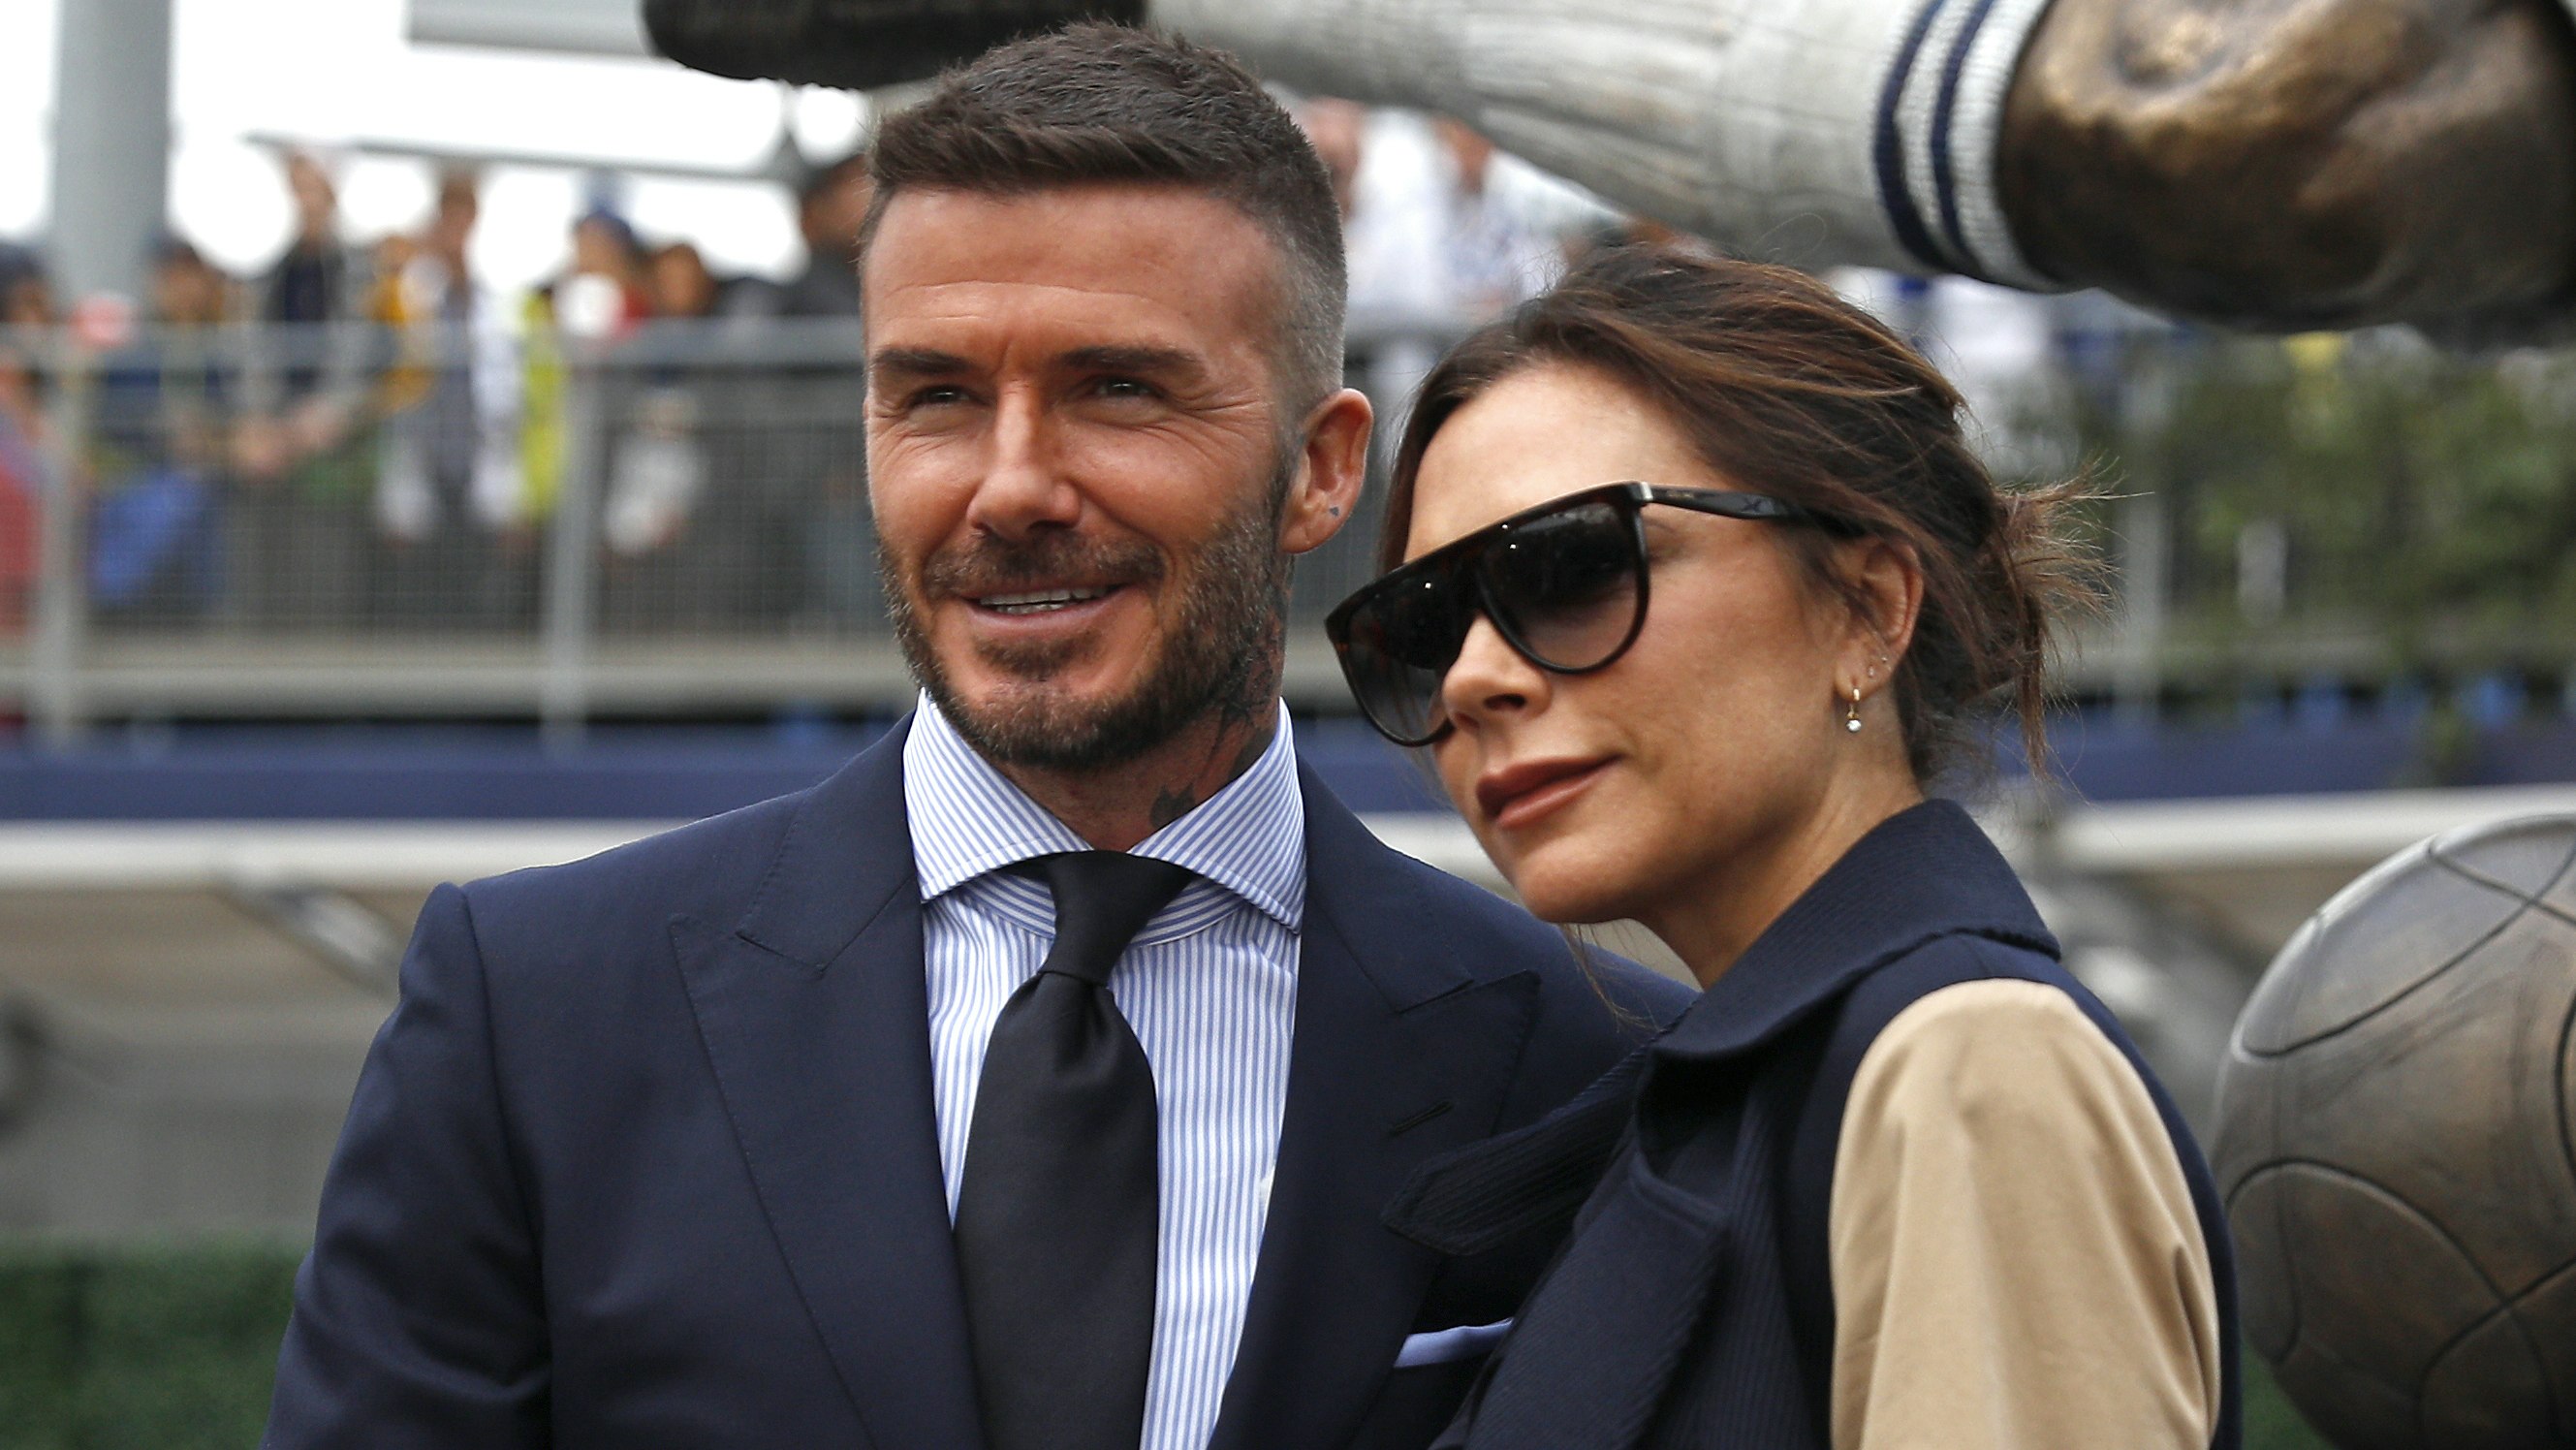 Victoria Beckham and David Beckham's Date Night Style at the